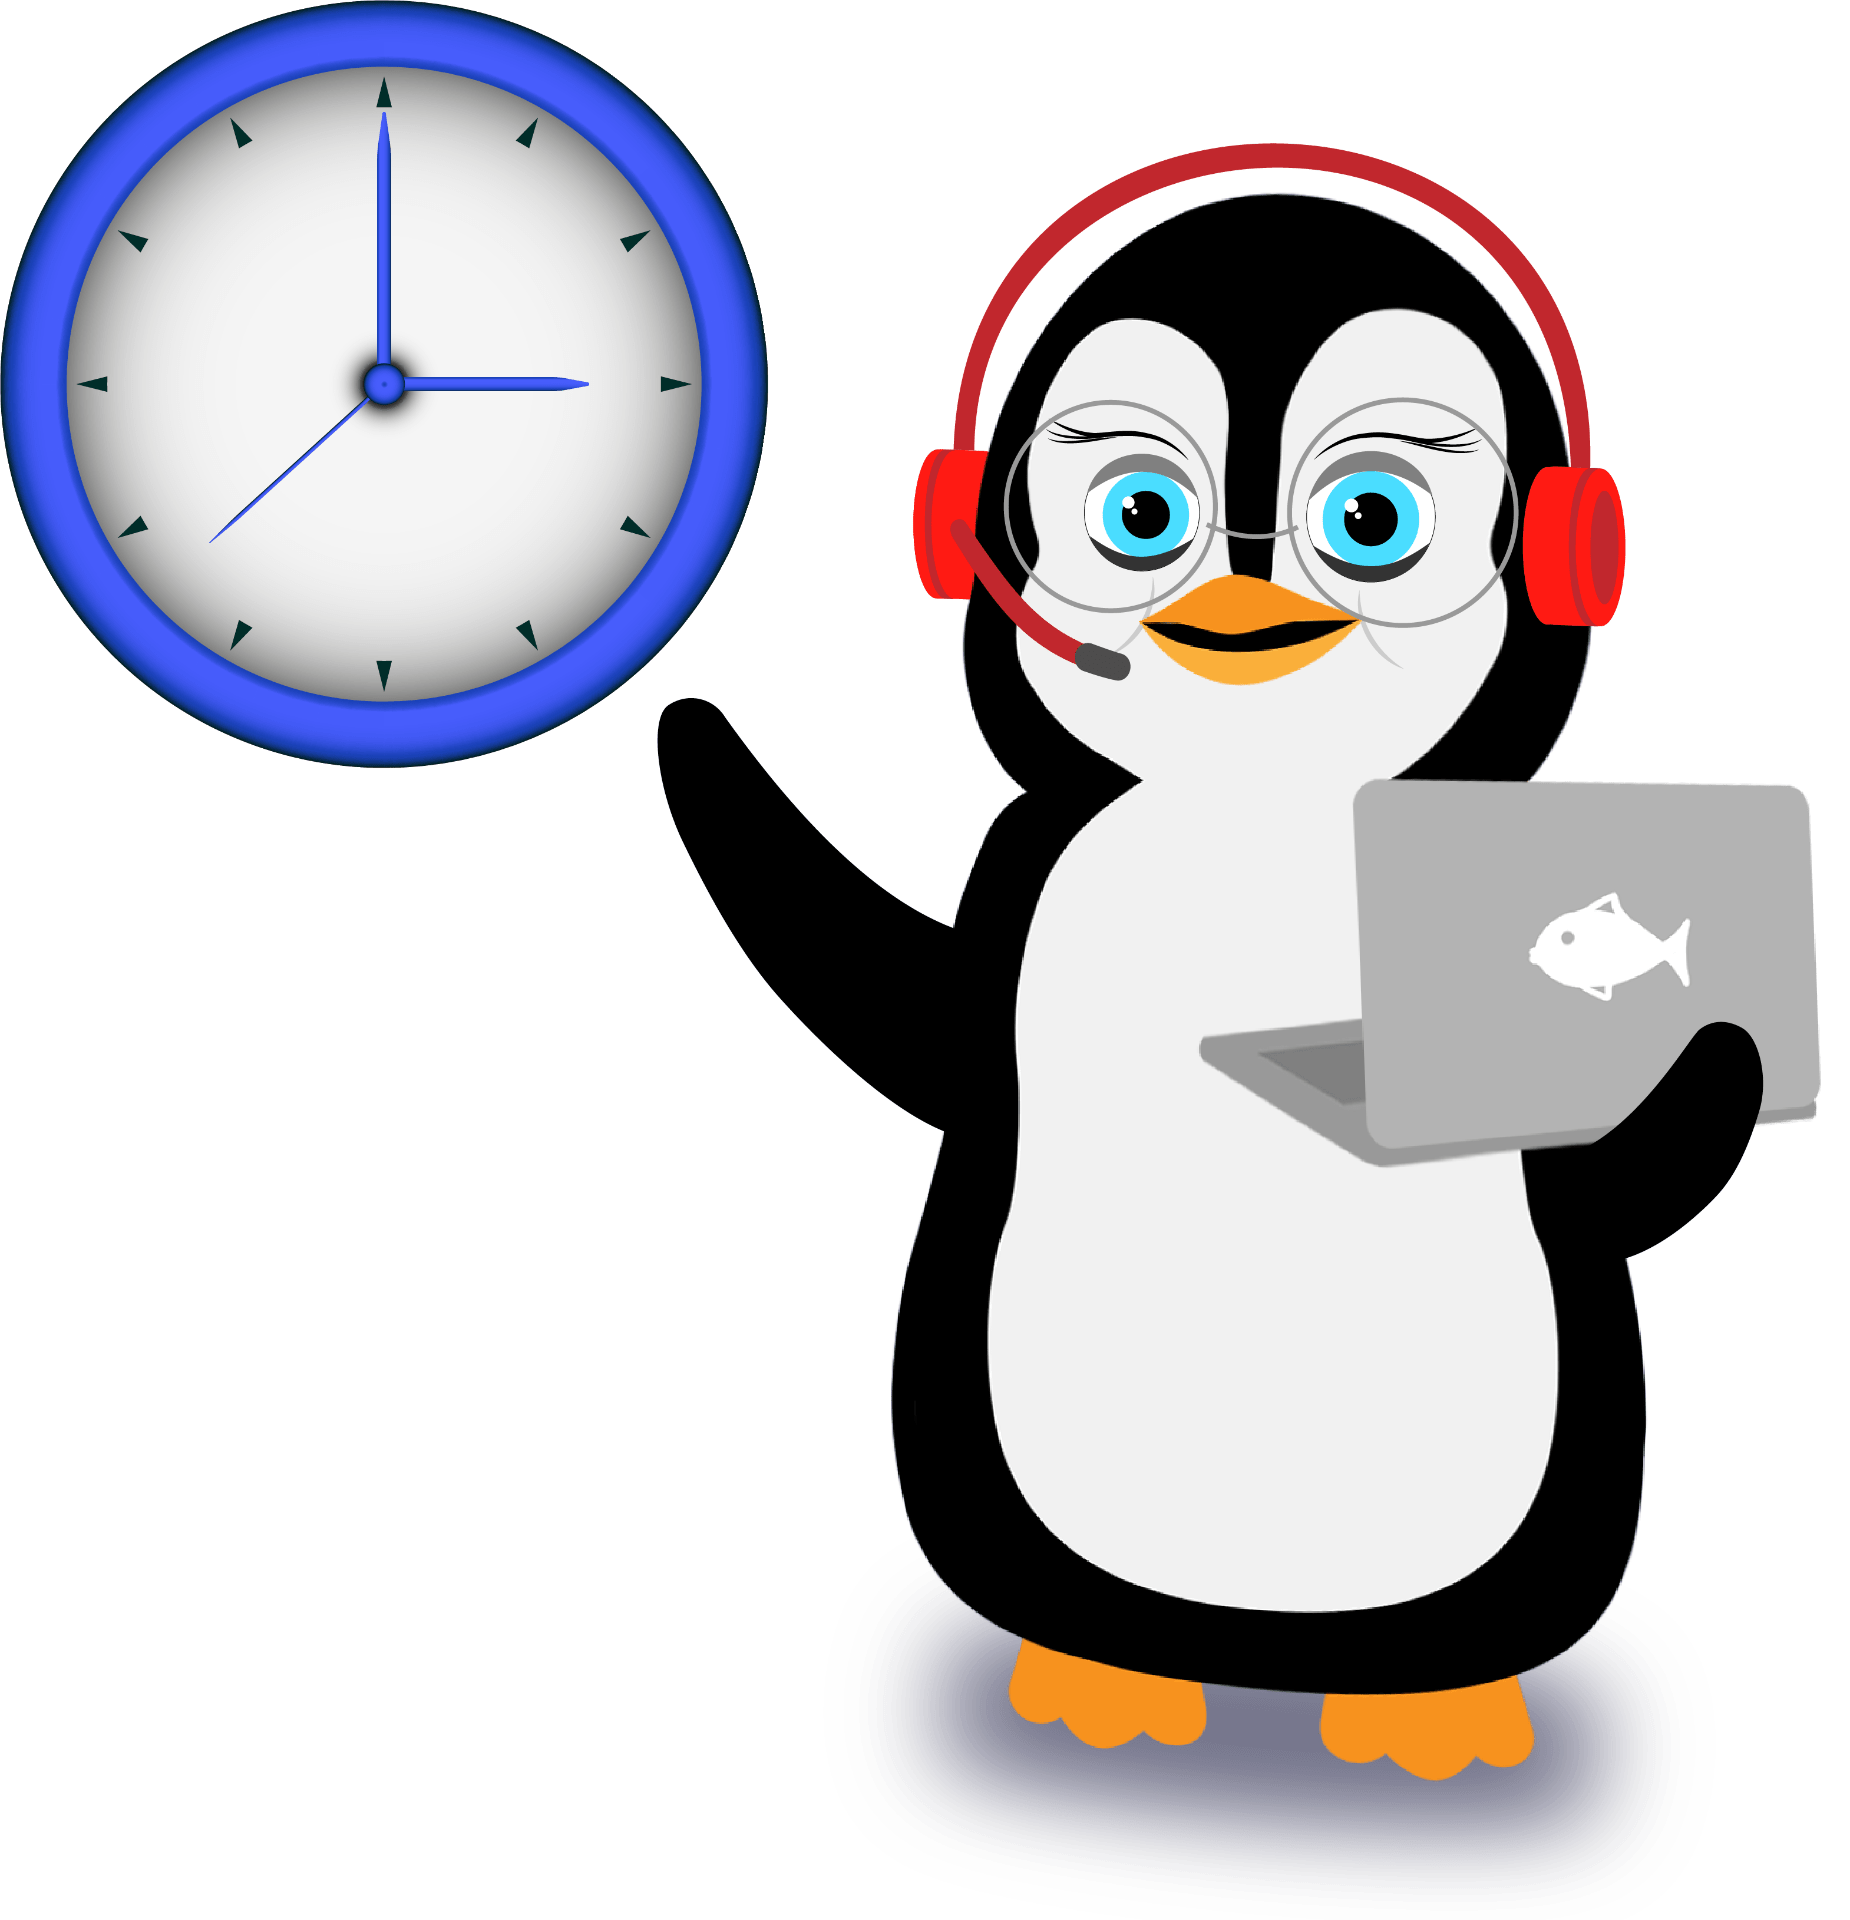 A penguin with a headset and laptop who is pointing to a wall clock